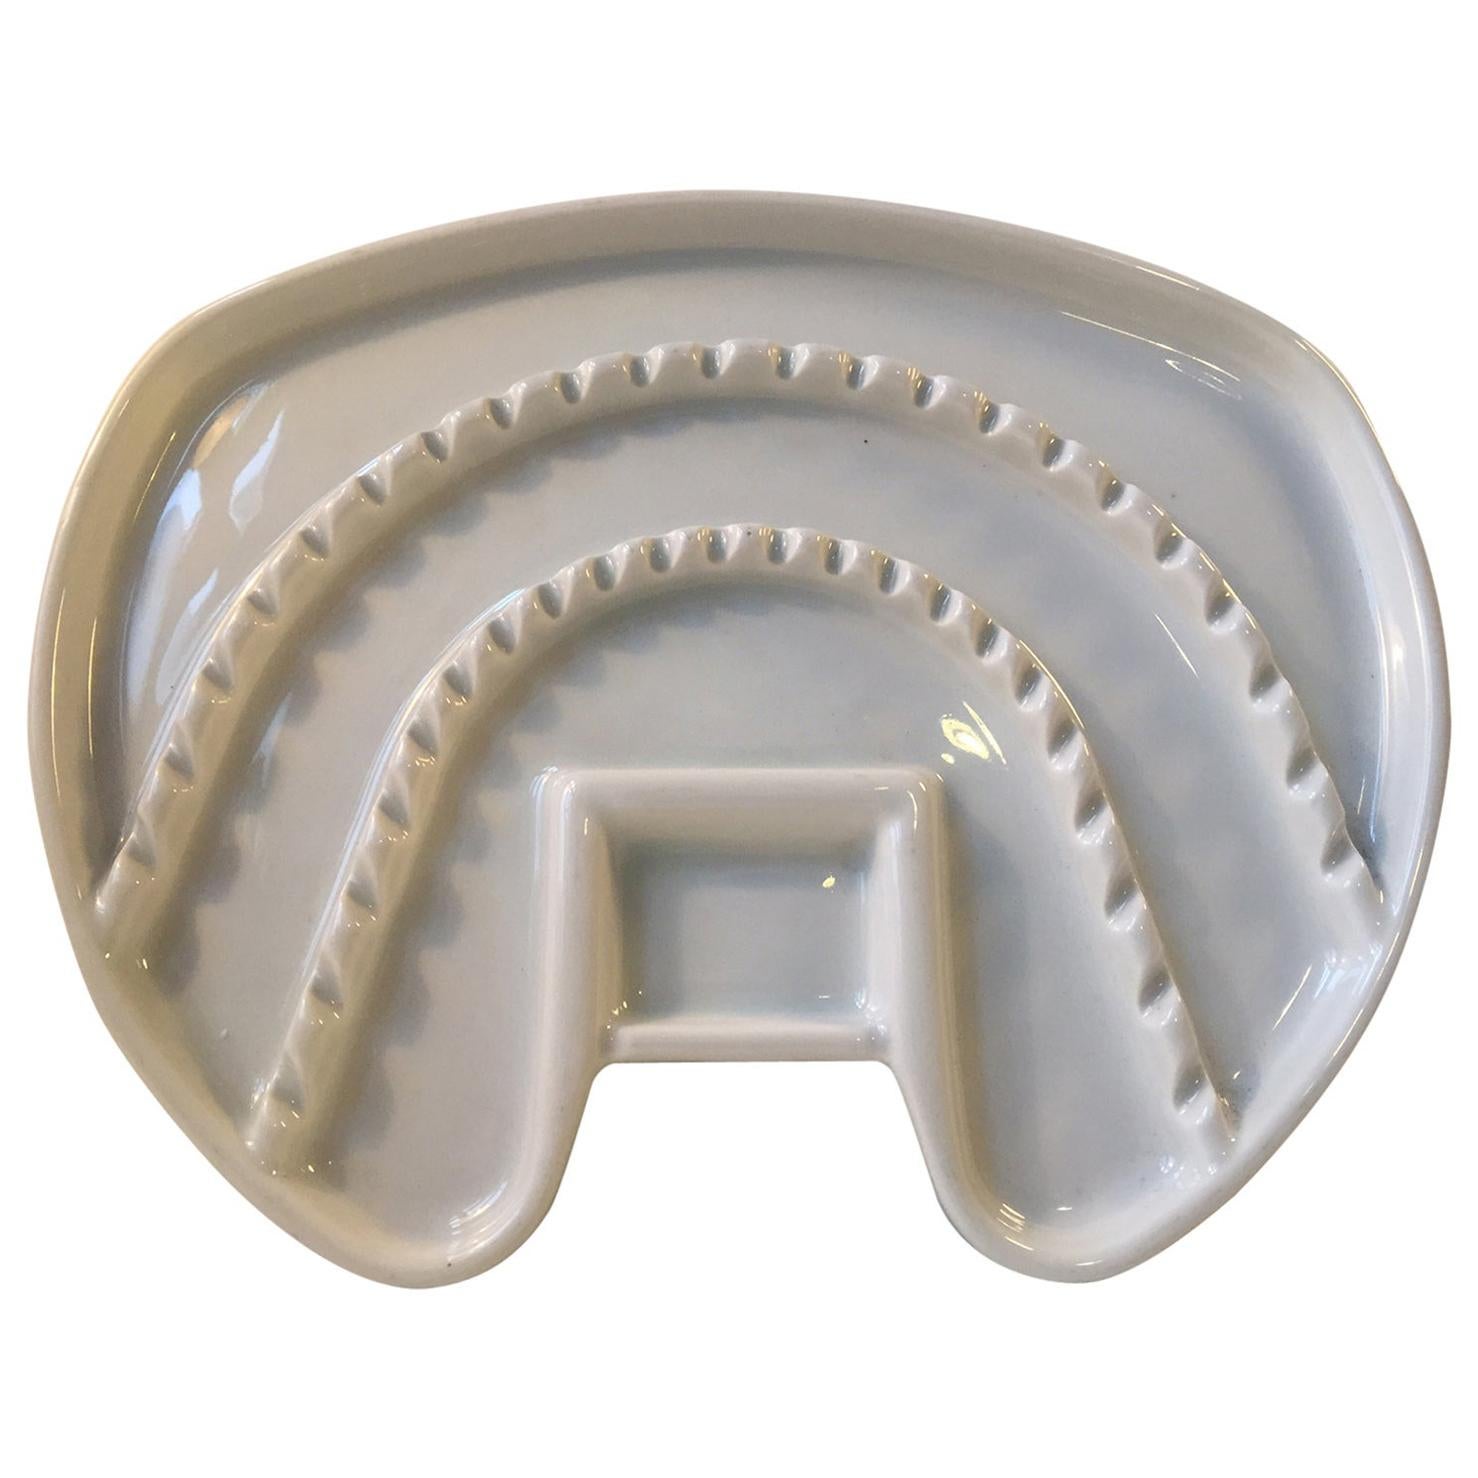 Large Tooth, Bauhaus Era Porcelain Tray for Dental Instruments, Germany, 1930s